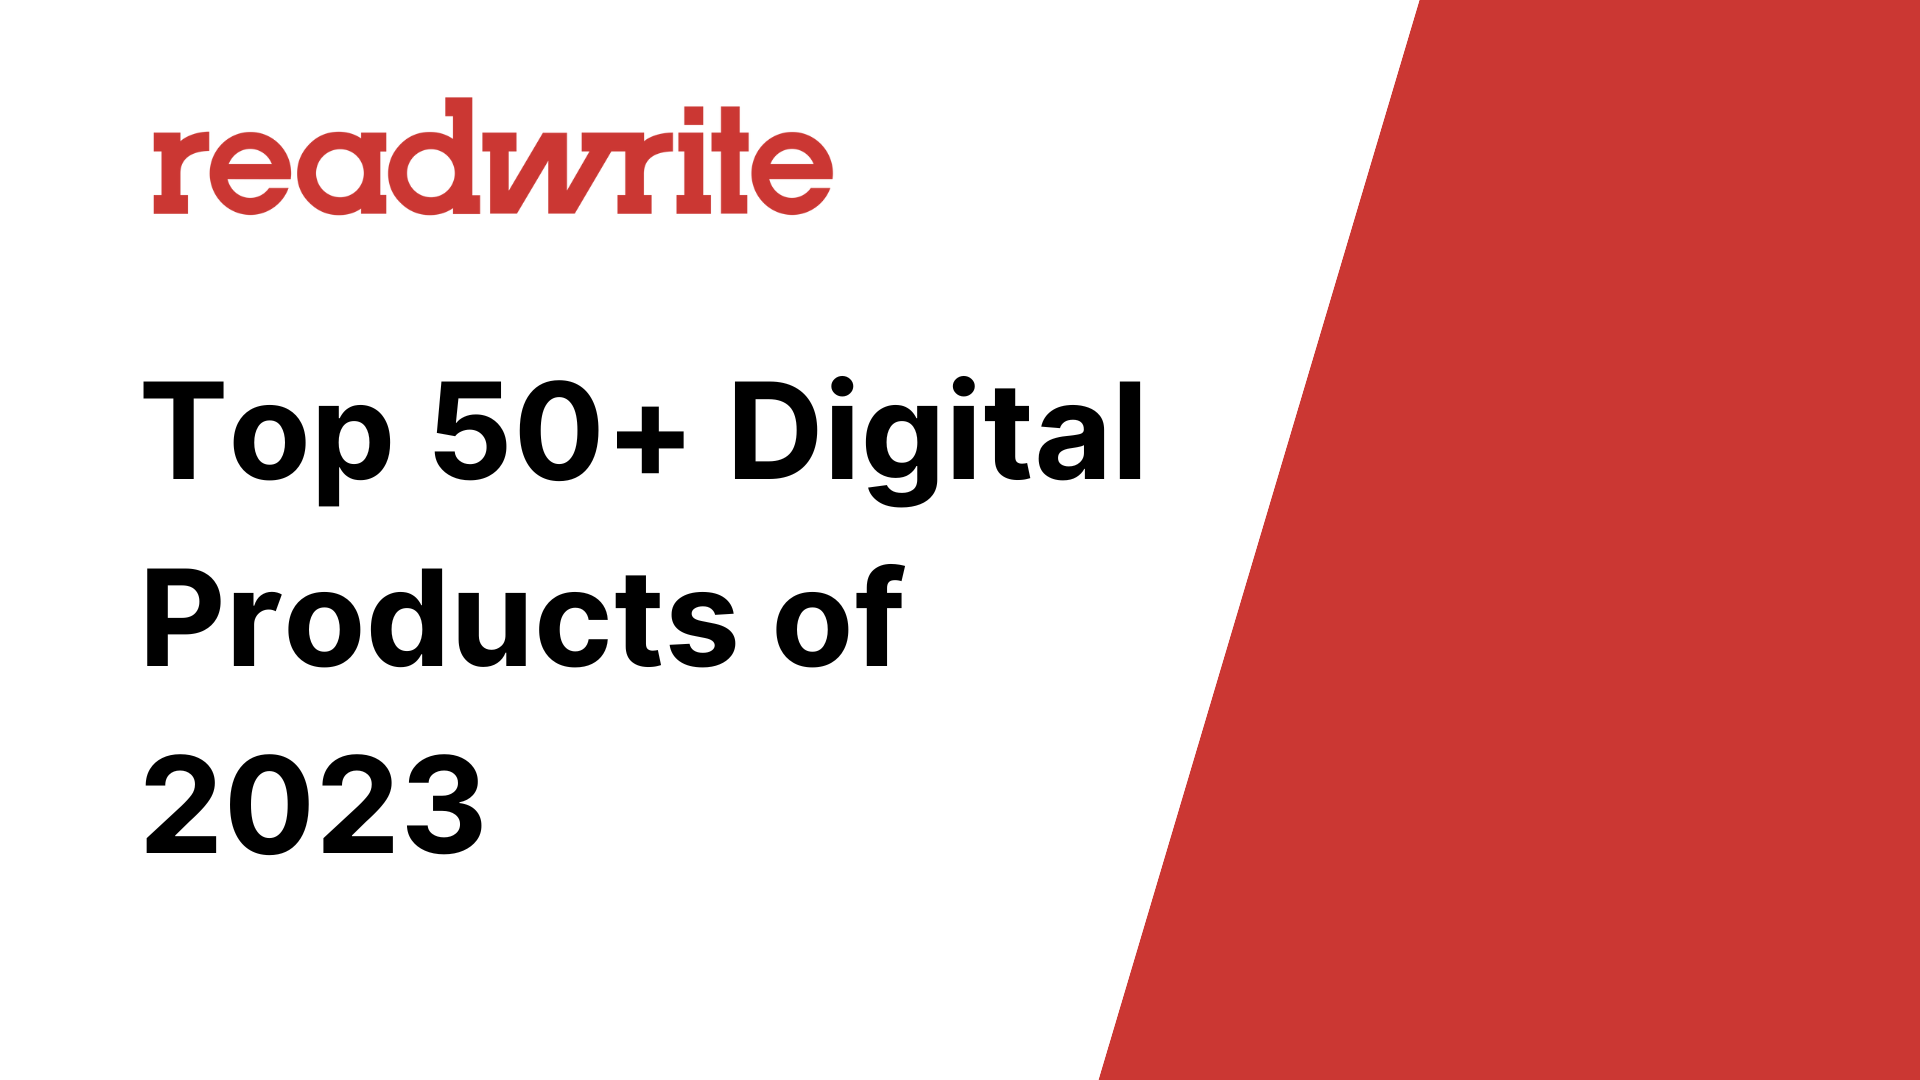 Top 50+ Digital Products of 2023 - readwrite.com